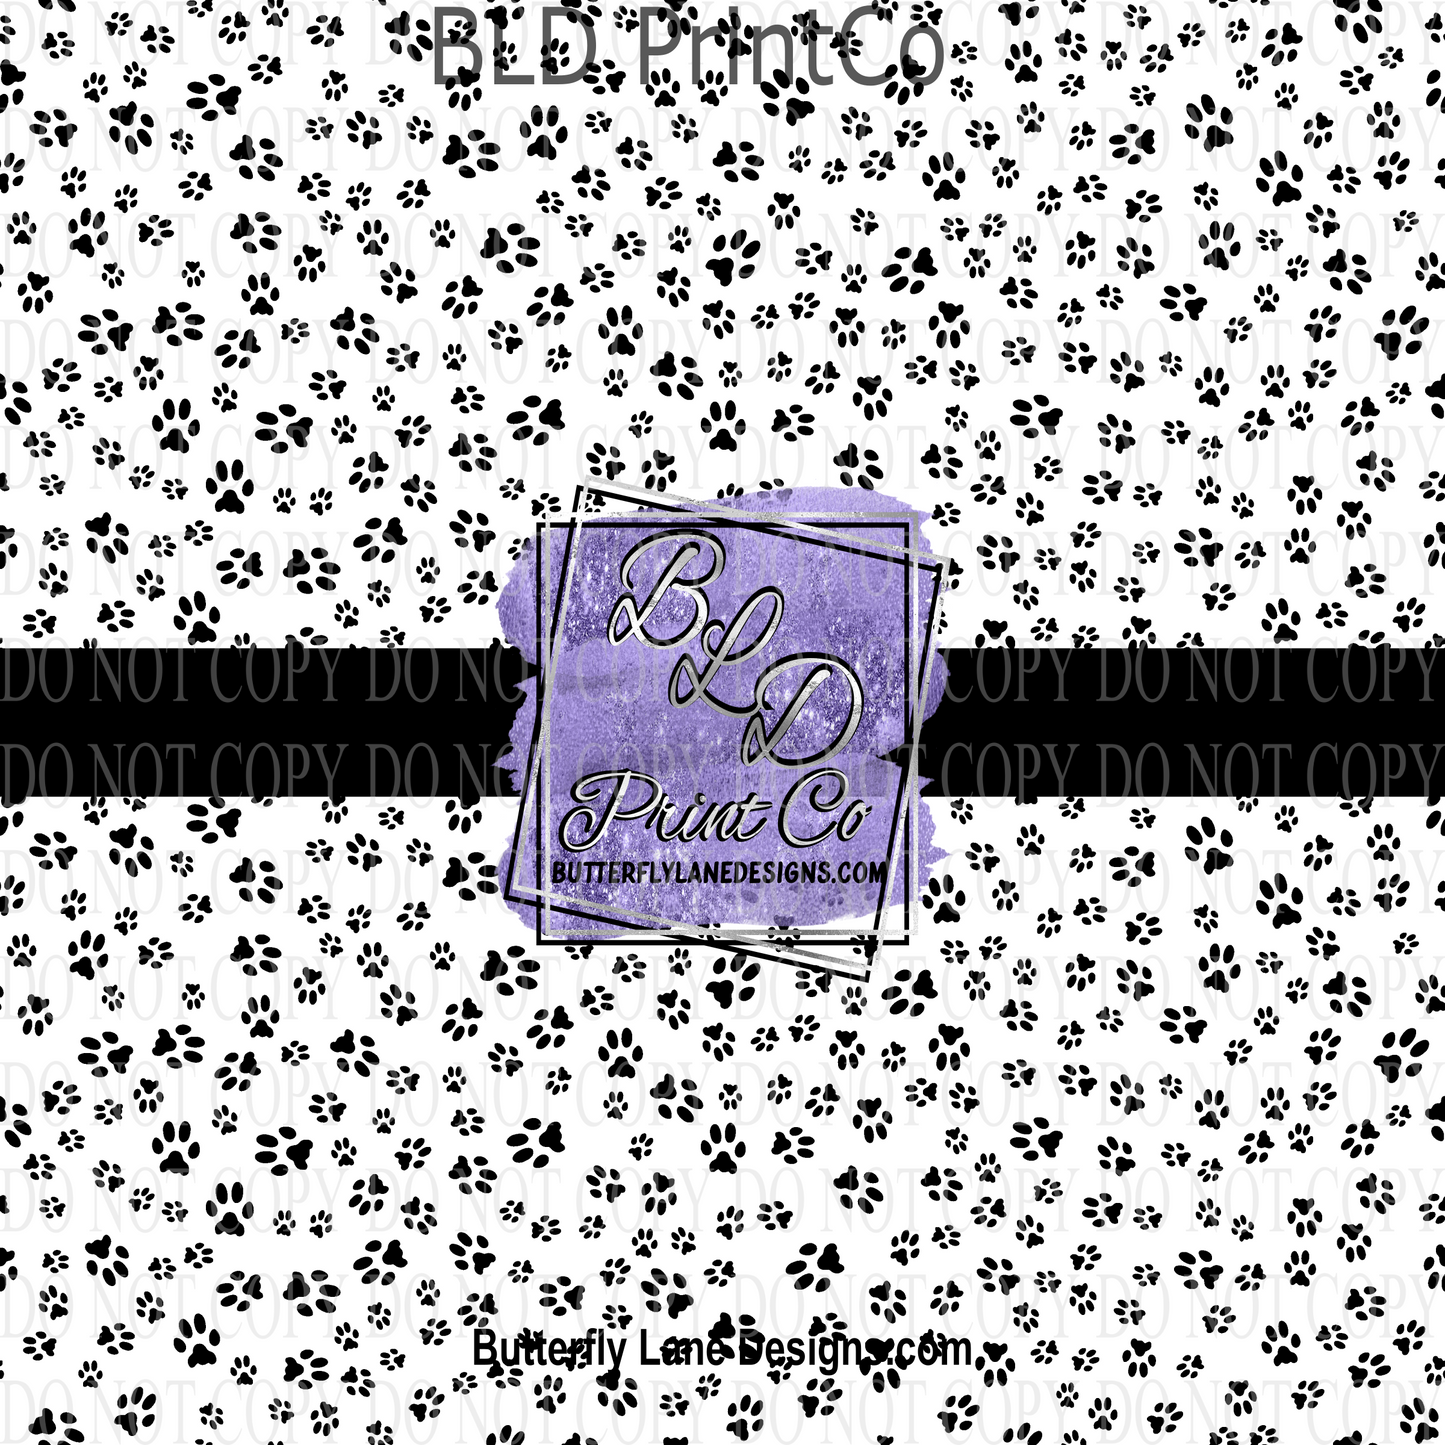 Busy Animal Paw prints  PV 871  Patterned Vinyl